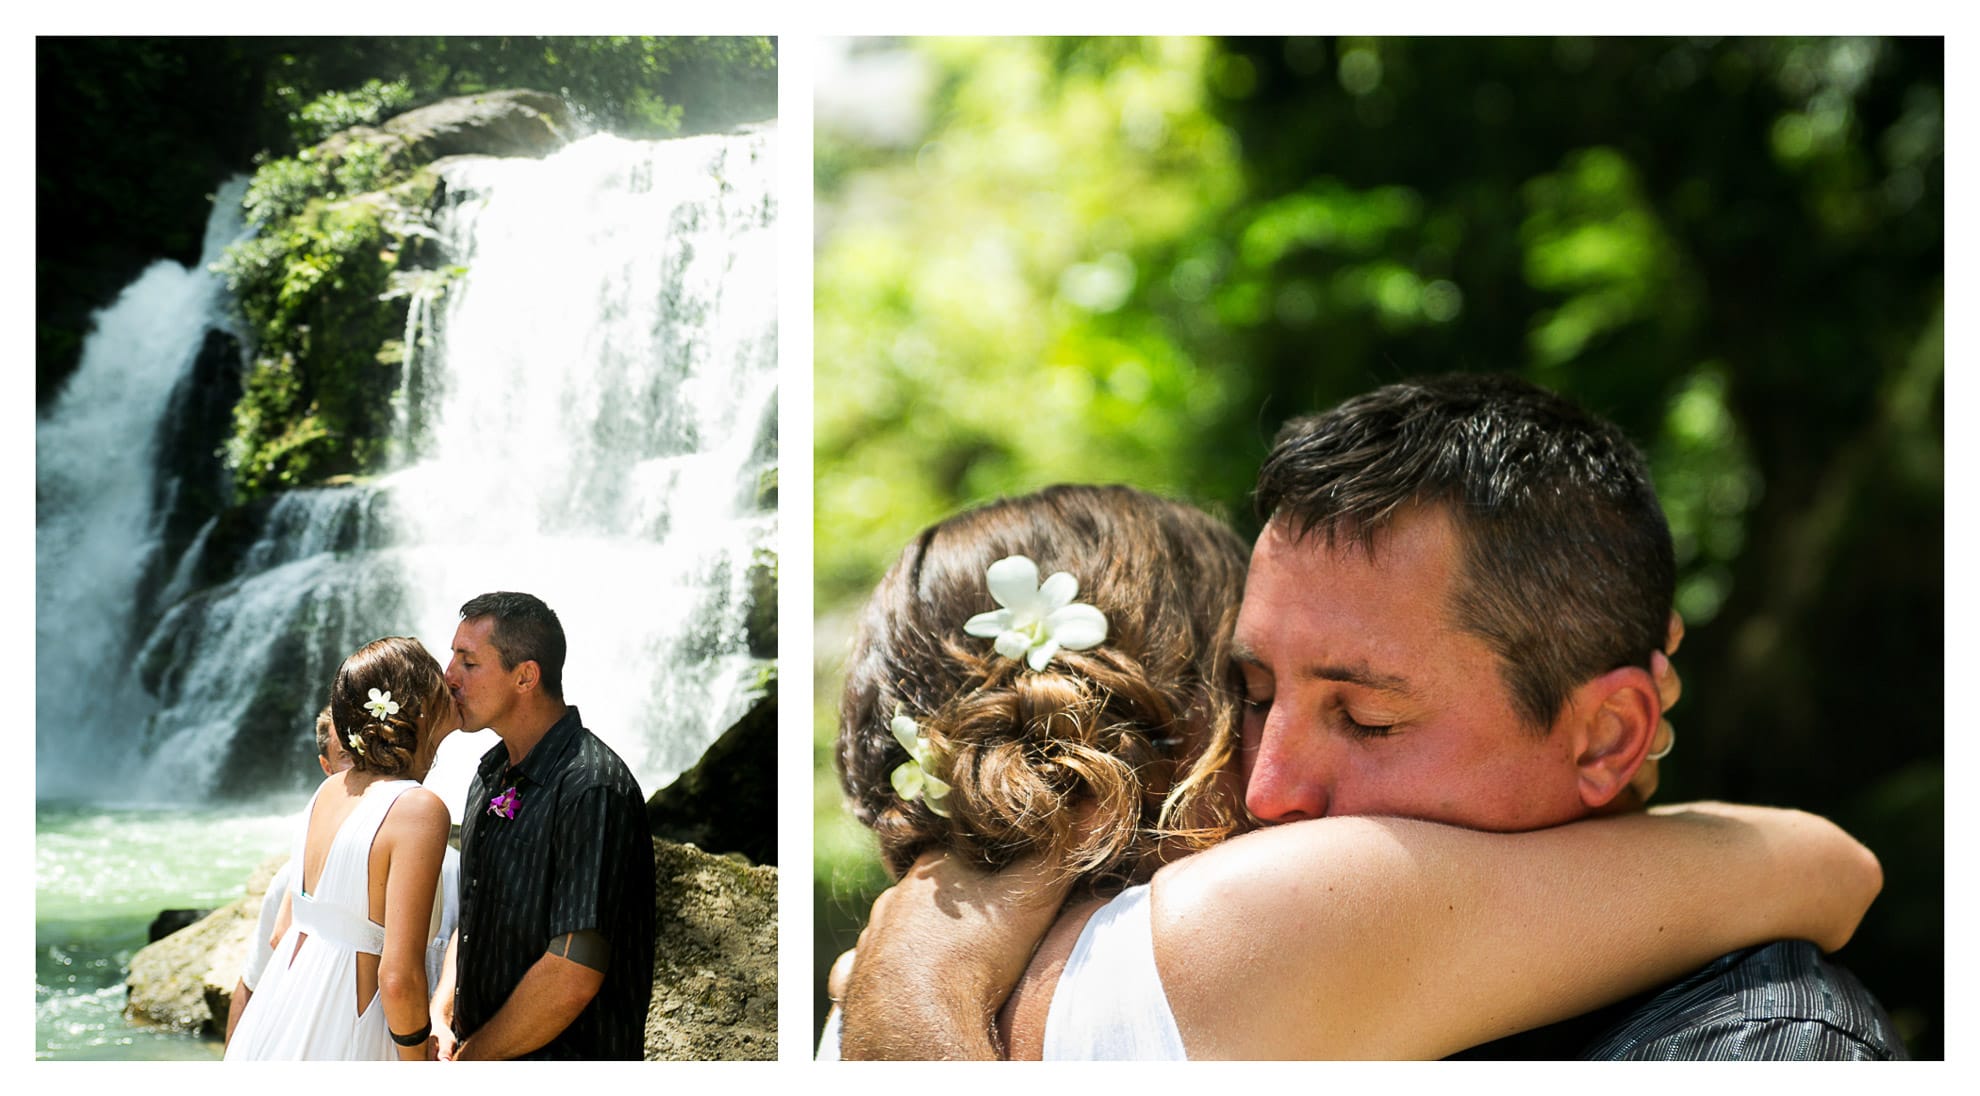 Wedding ceremony at waterfall in Costa Rica